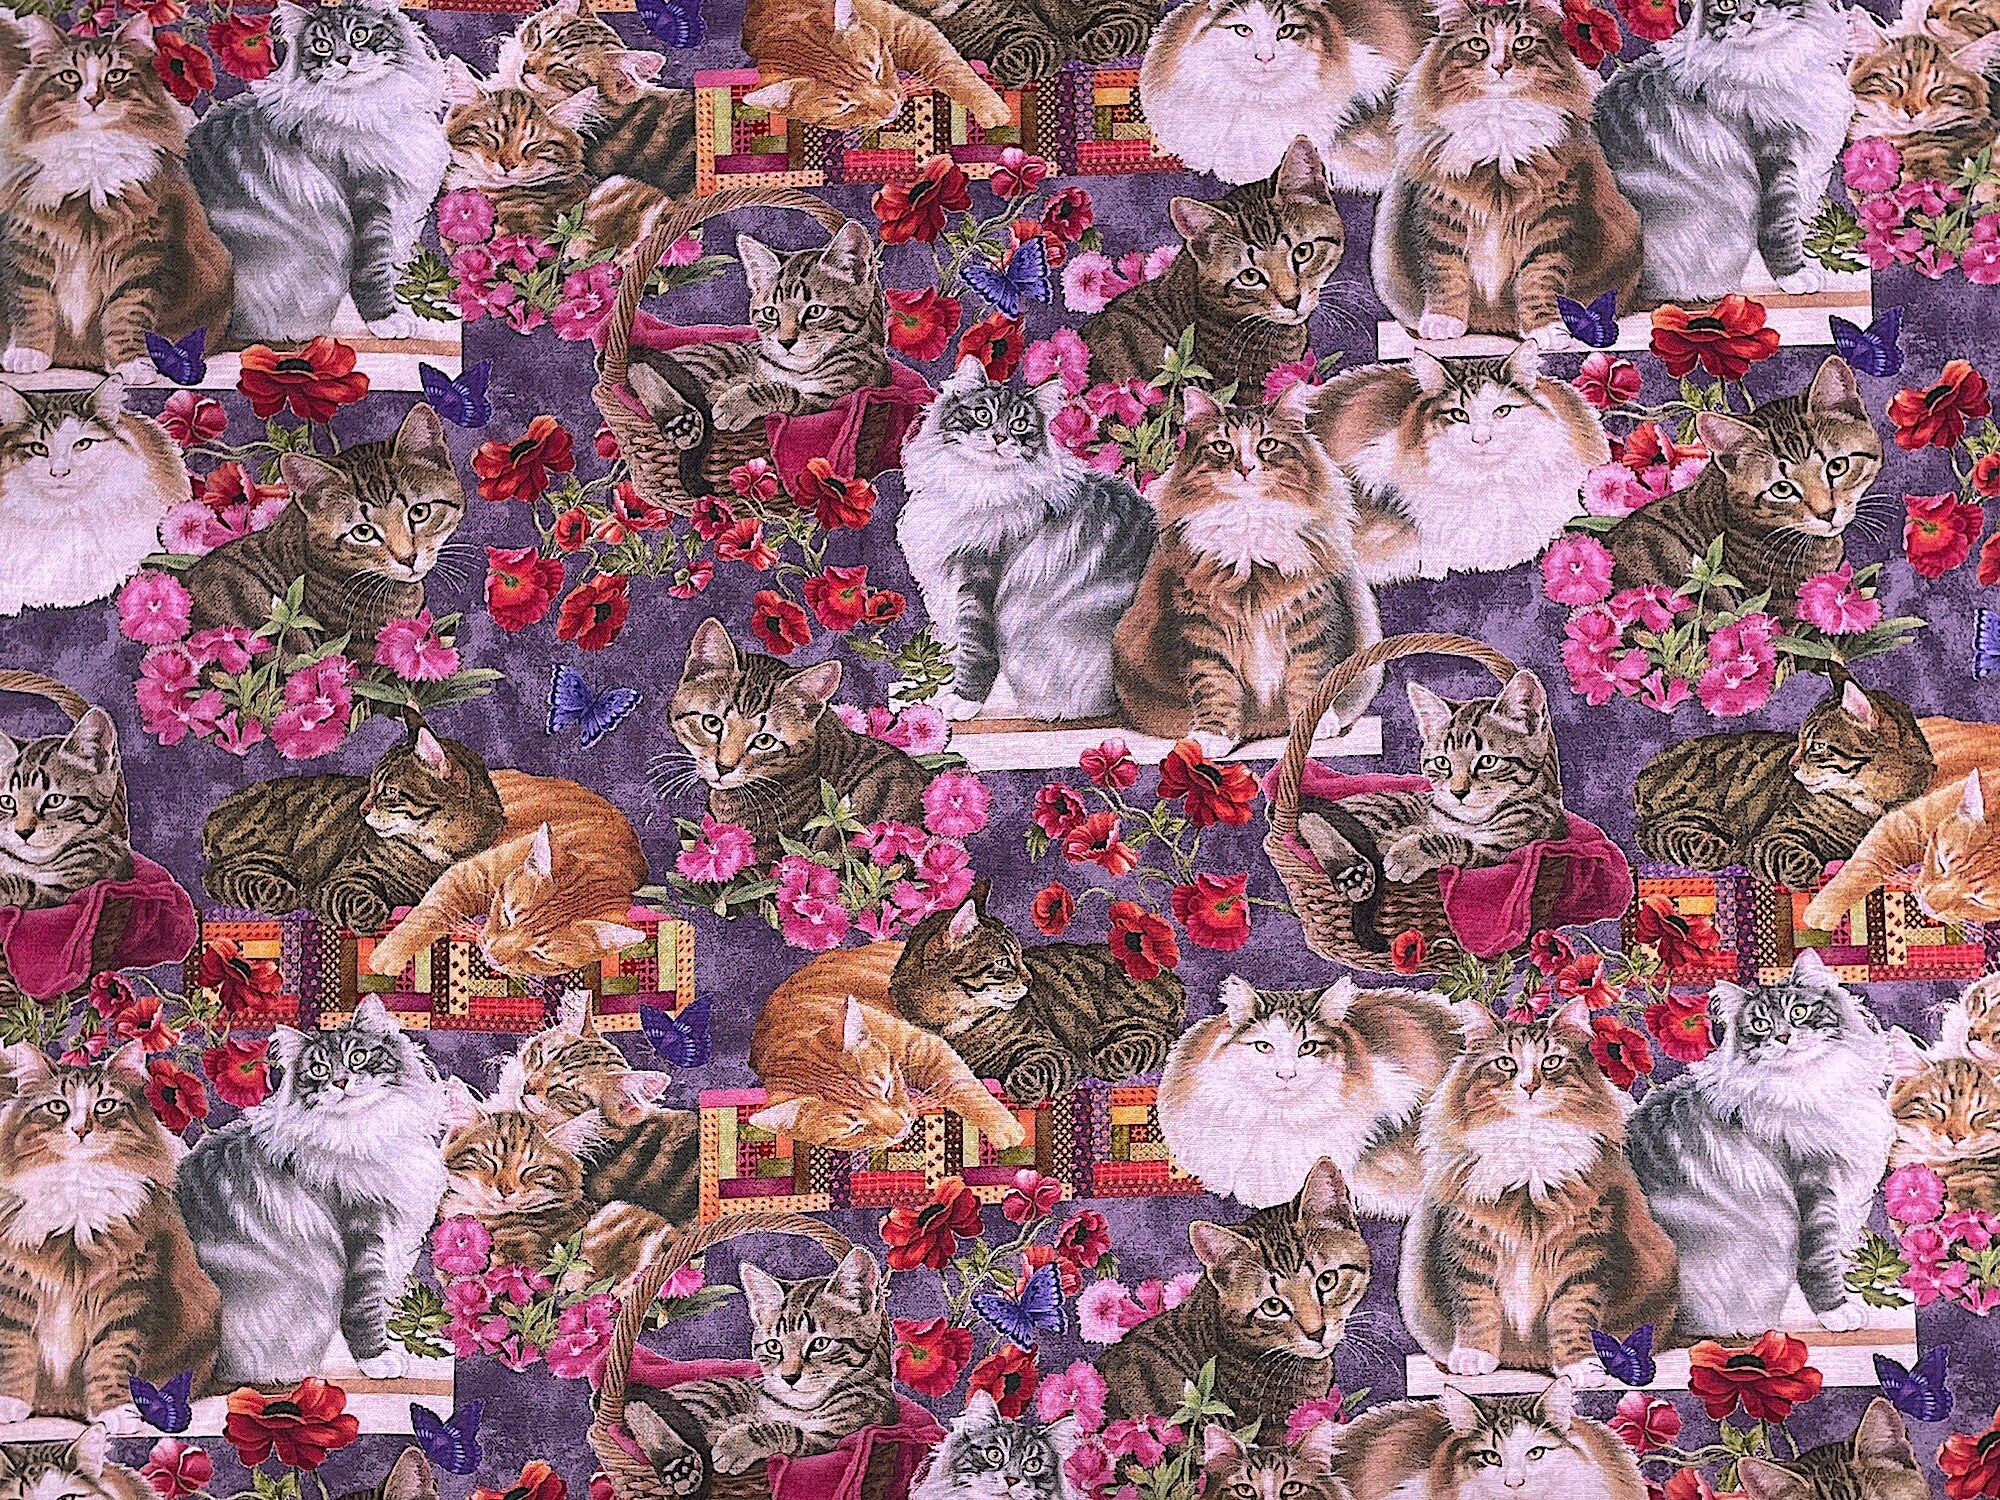 Cotton fabric covered with cats, quilts and flowers.